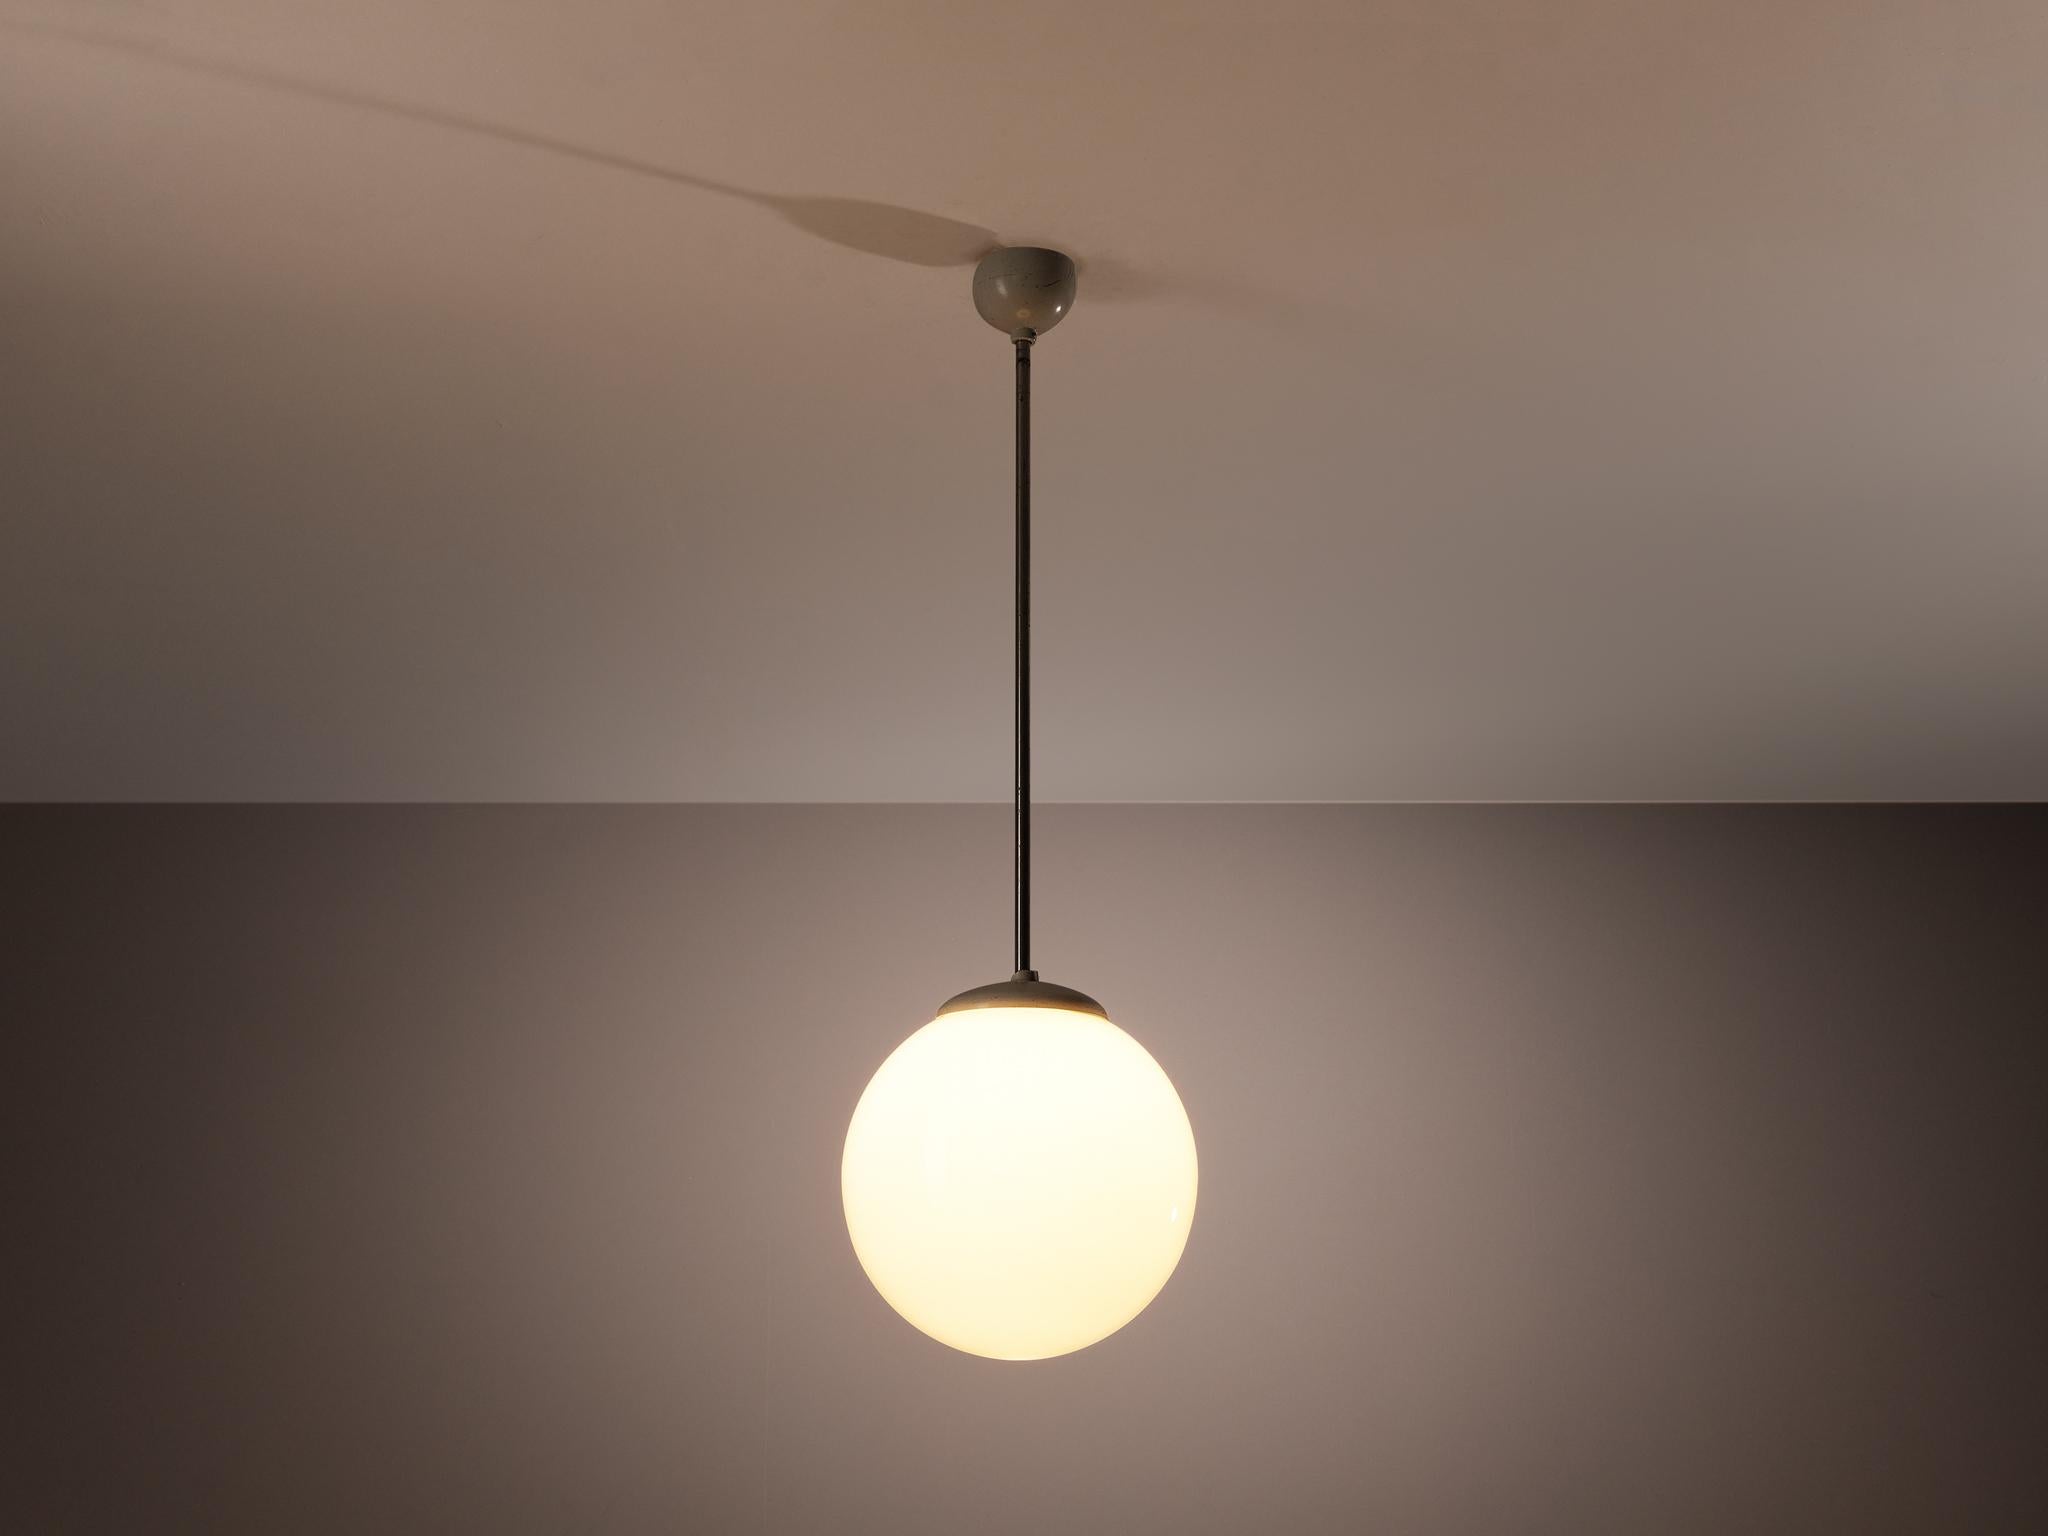 Pendant, opaline glass, metal, plastic, Europe, 1960s.

Clean and simple pendant lamp with opaline glass sphere, metal rod and plastic detailing. The lamp can be hung above a dining table as a set or in an entranceway in order to make an